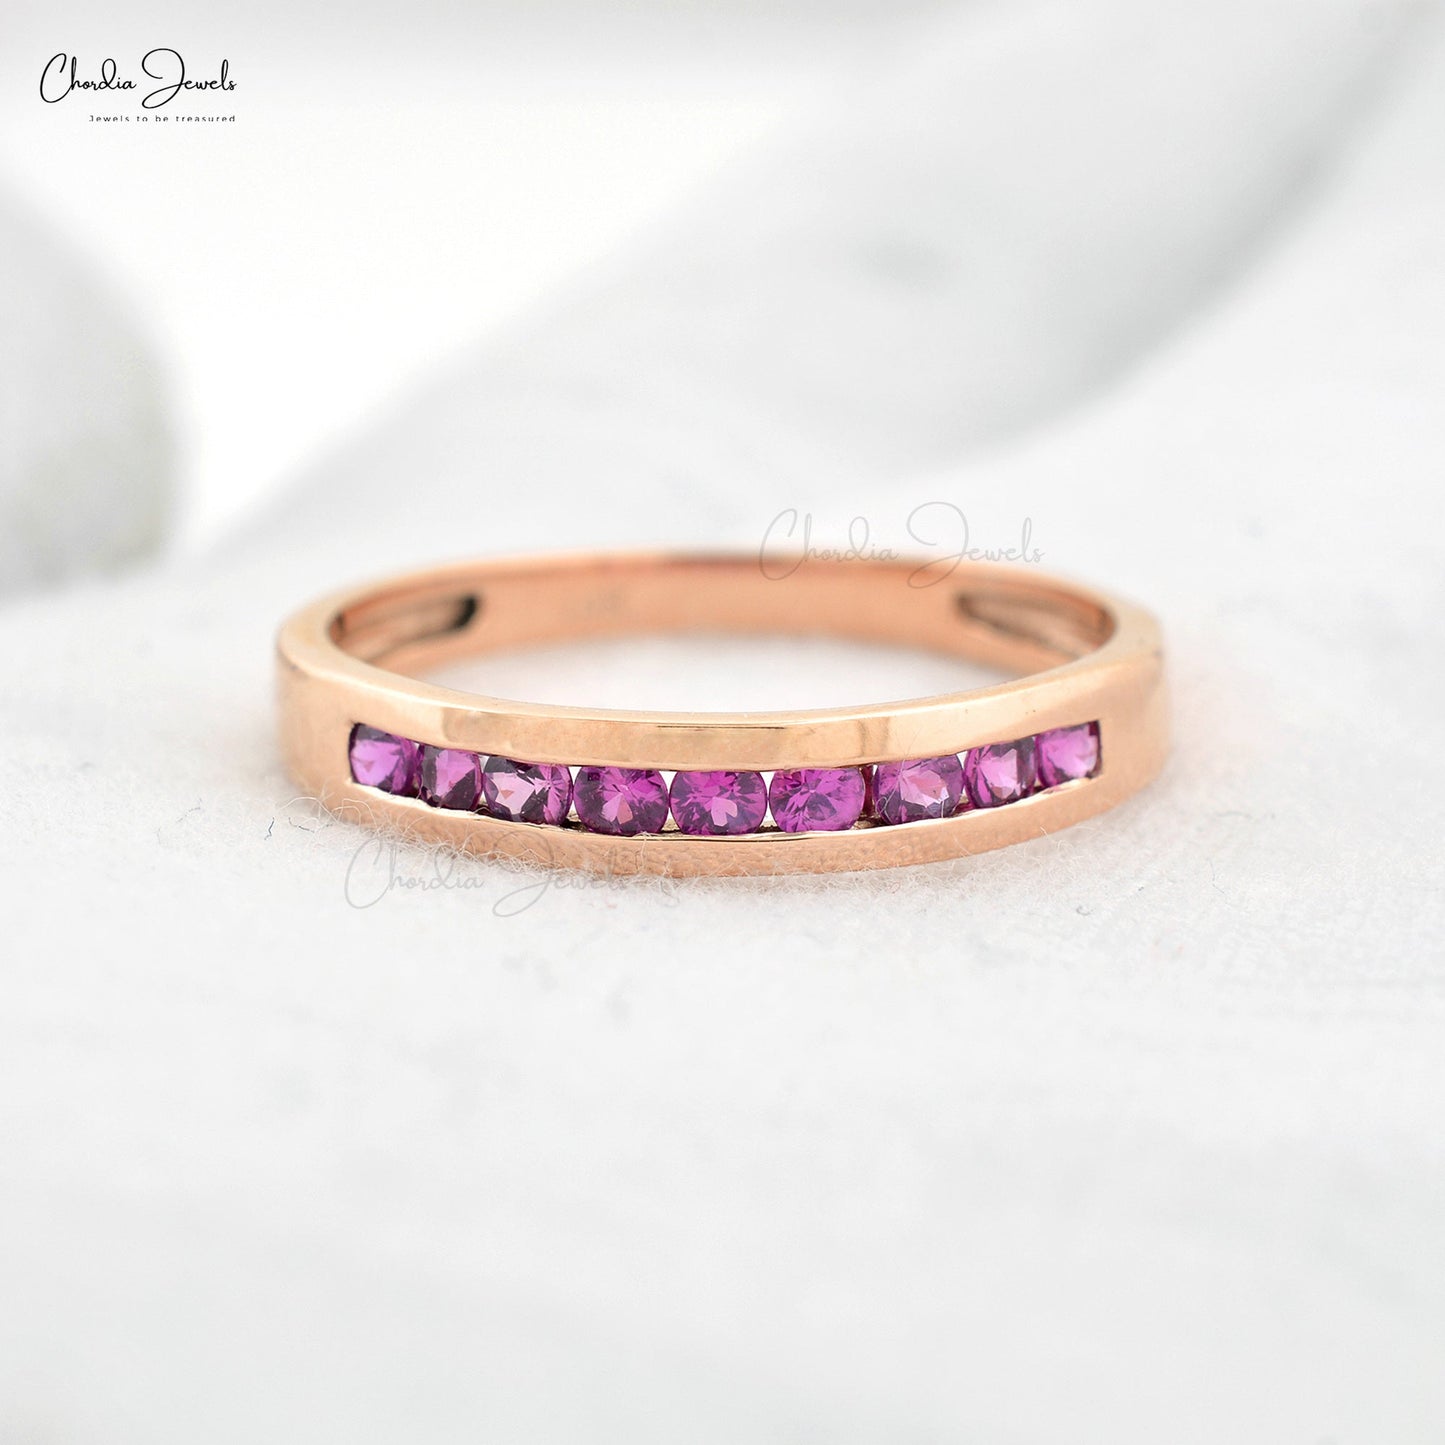 Load image into Gallery viewer, Pink Sapphire half Eternity Gemstone Ring, 2mm Round Cut Pink Sapphire Handmade Gemstone Ring For Women, September Birthstone Sapphire Eternity Ring Gift For Her
